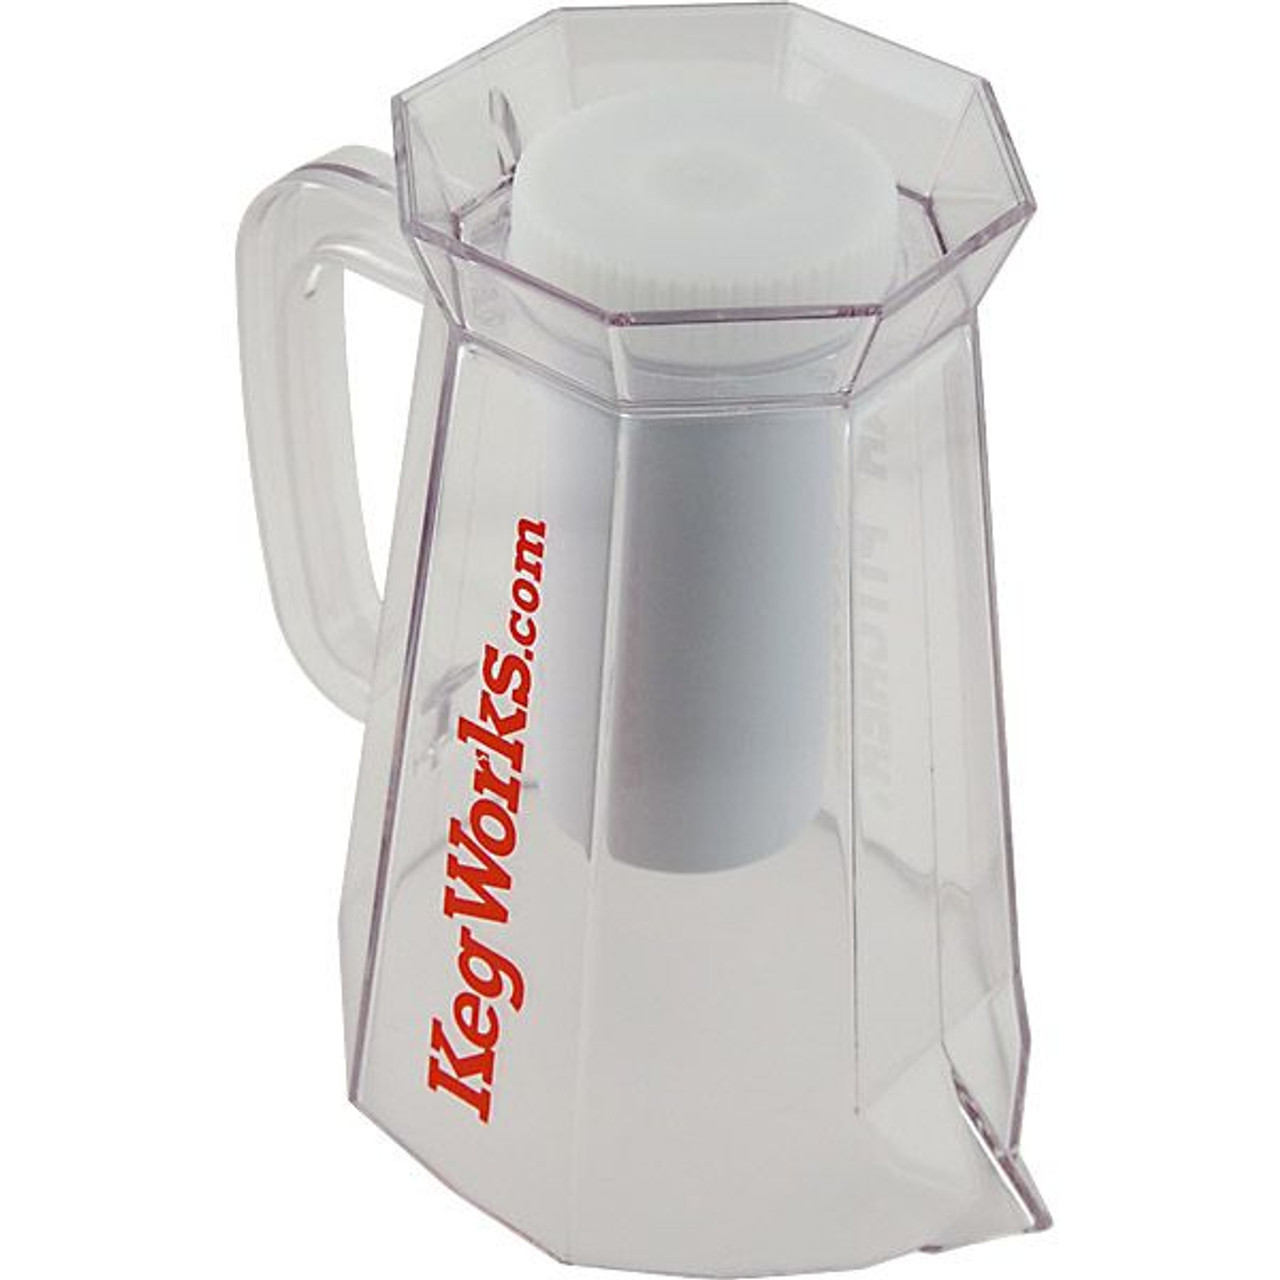 Polar Pitcher & Accessories Pack - Includes Pitcher with Ice Core